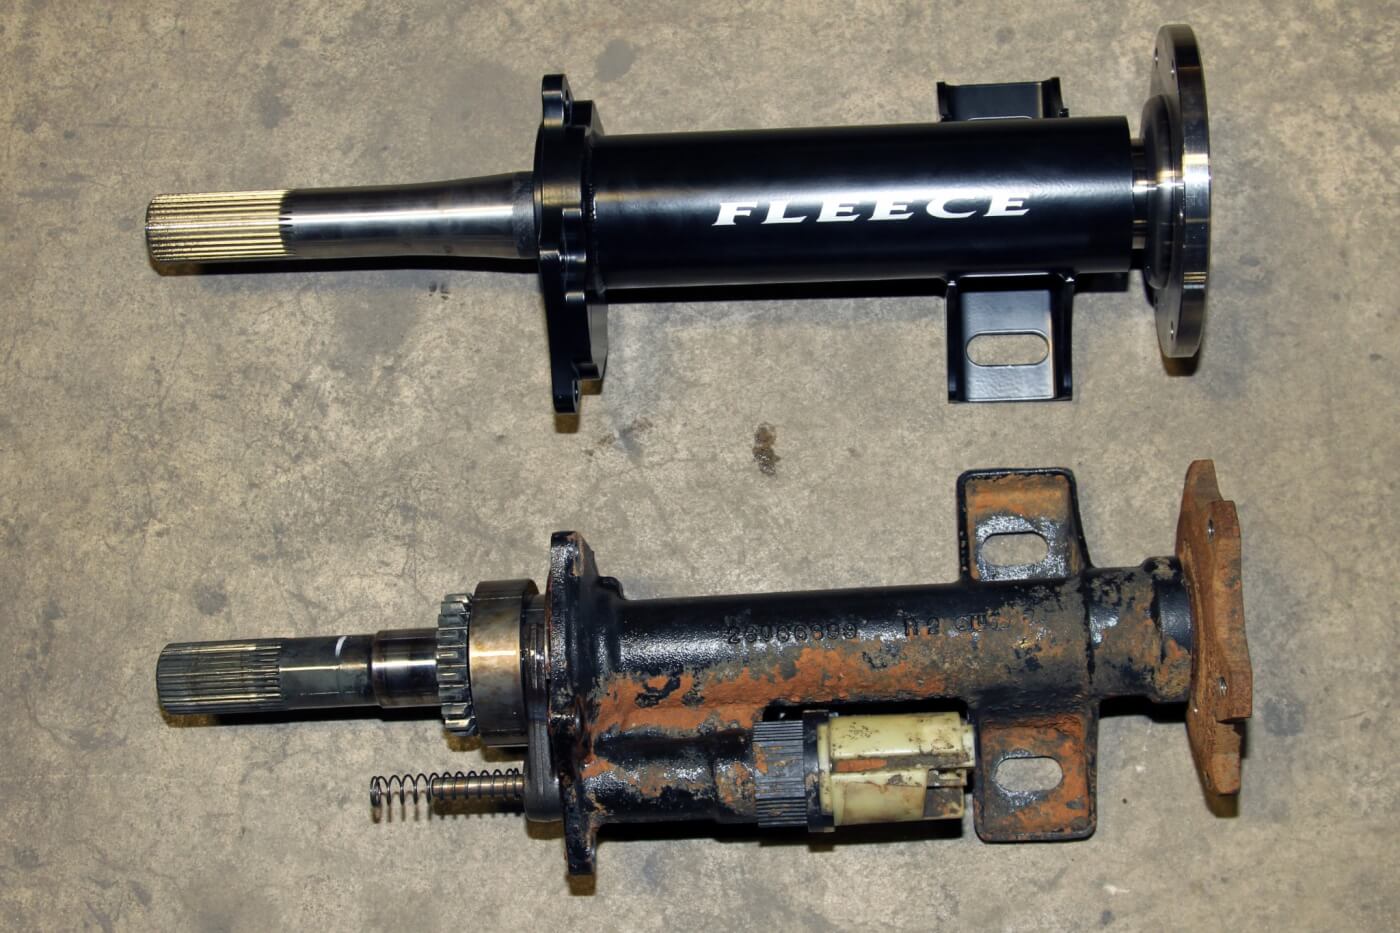 7. Compare the multi-piece factory axle assembly to the single-piece TufShaft from Fleece Performance Engineering. We installed one of the early TufShaft kits, which included a replacement housing for the axle. Their current design retains the stock housing but uses a single-piece shaft.